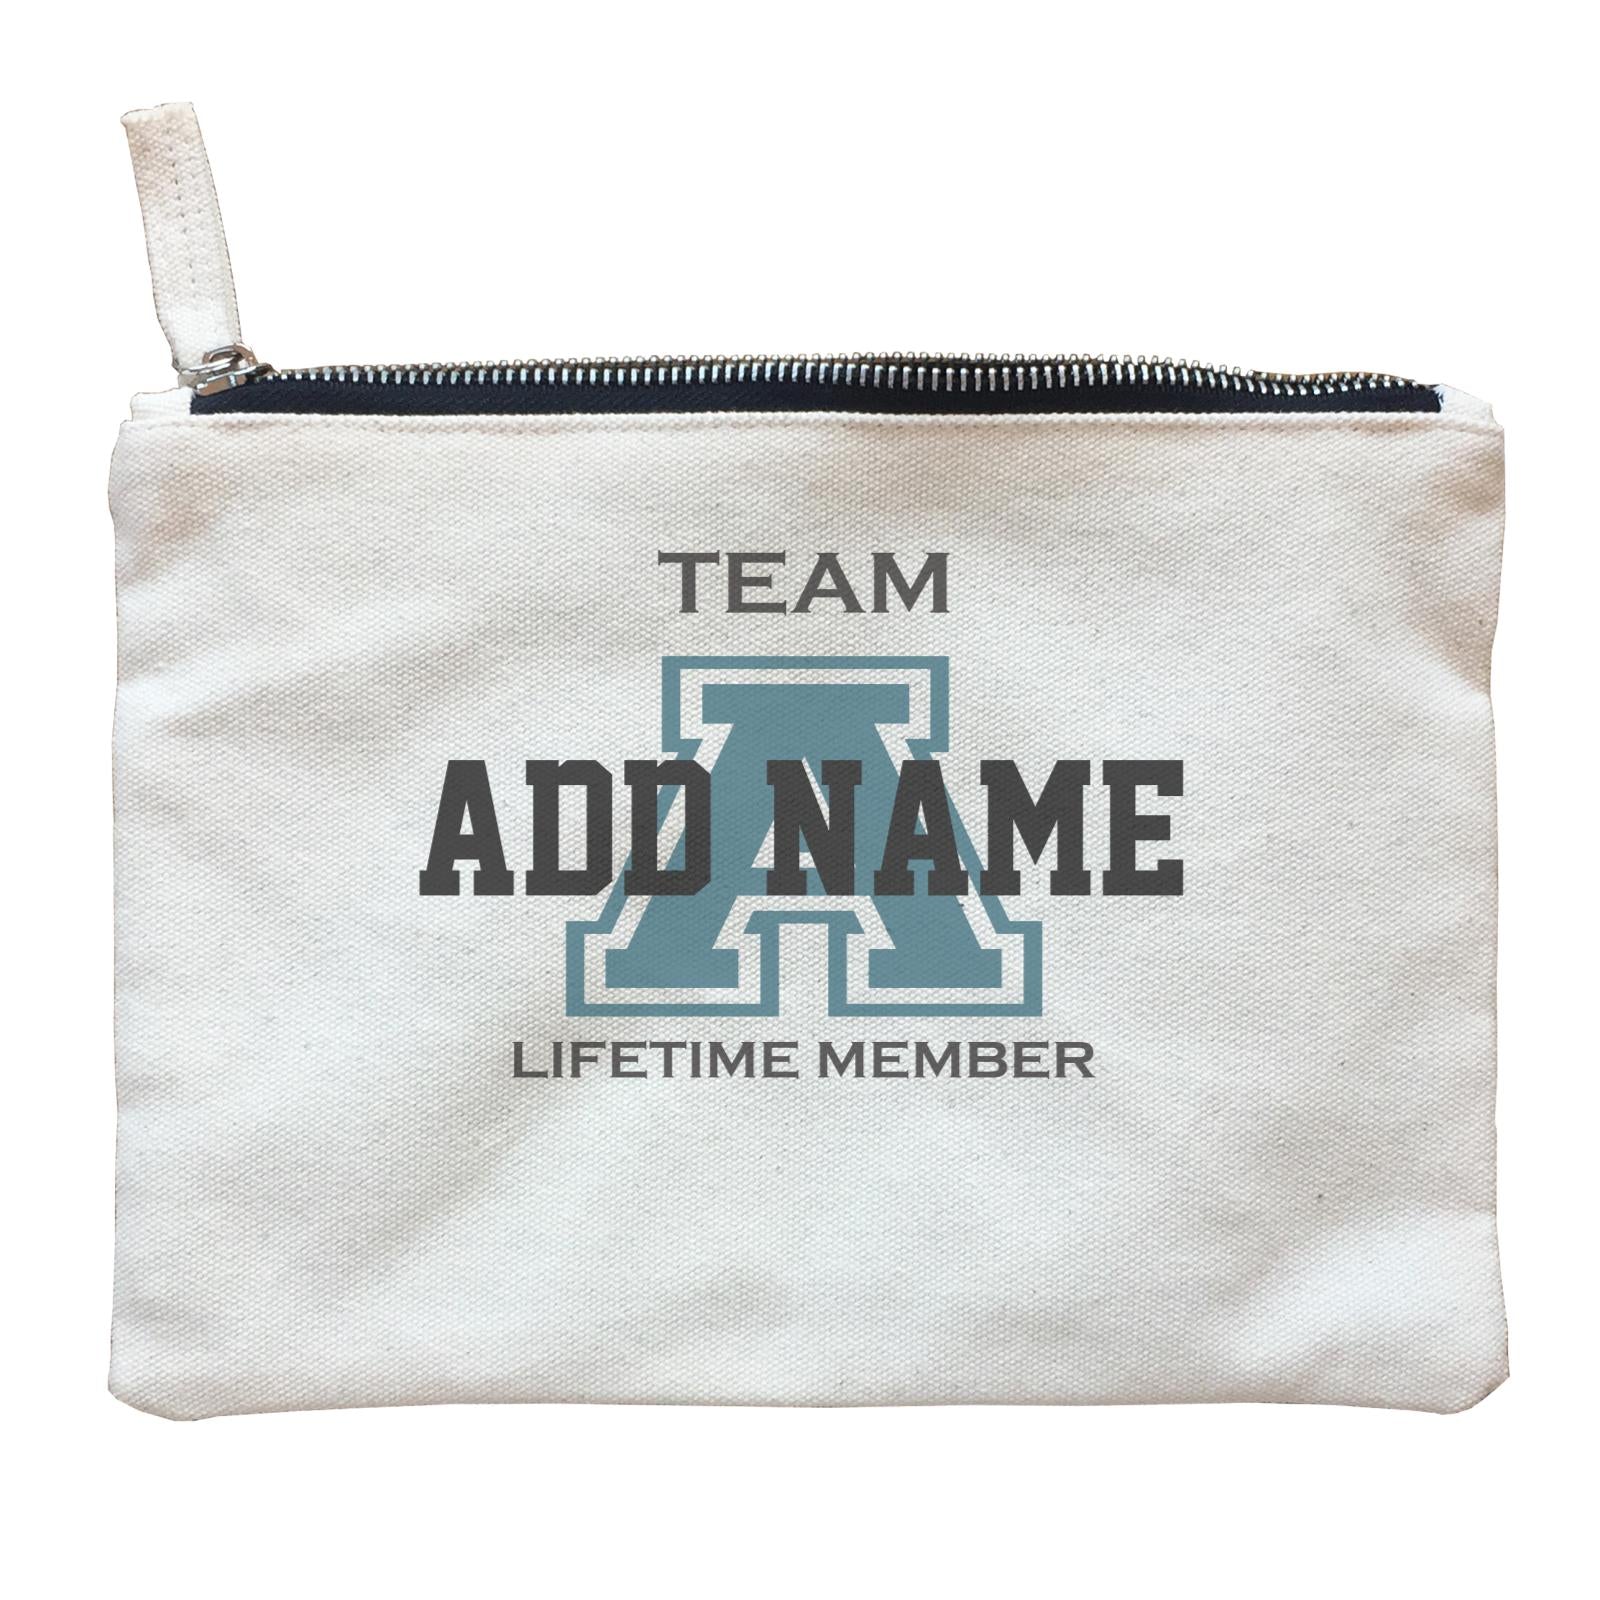 Personalize It Awesome Team Blue Add Letter Life Time Member with Addname Zipper Pouch